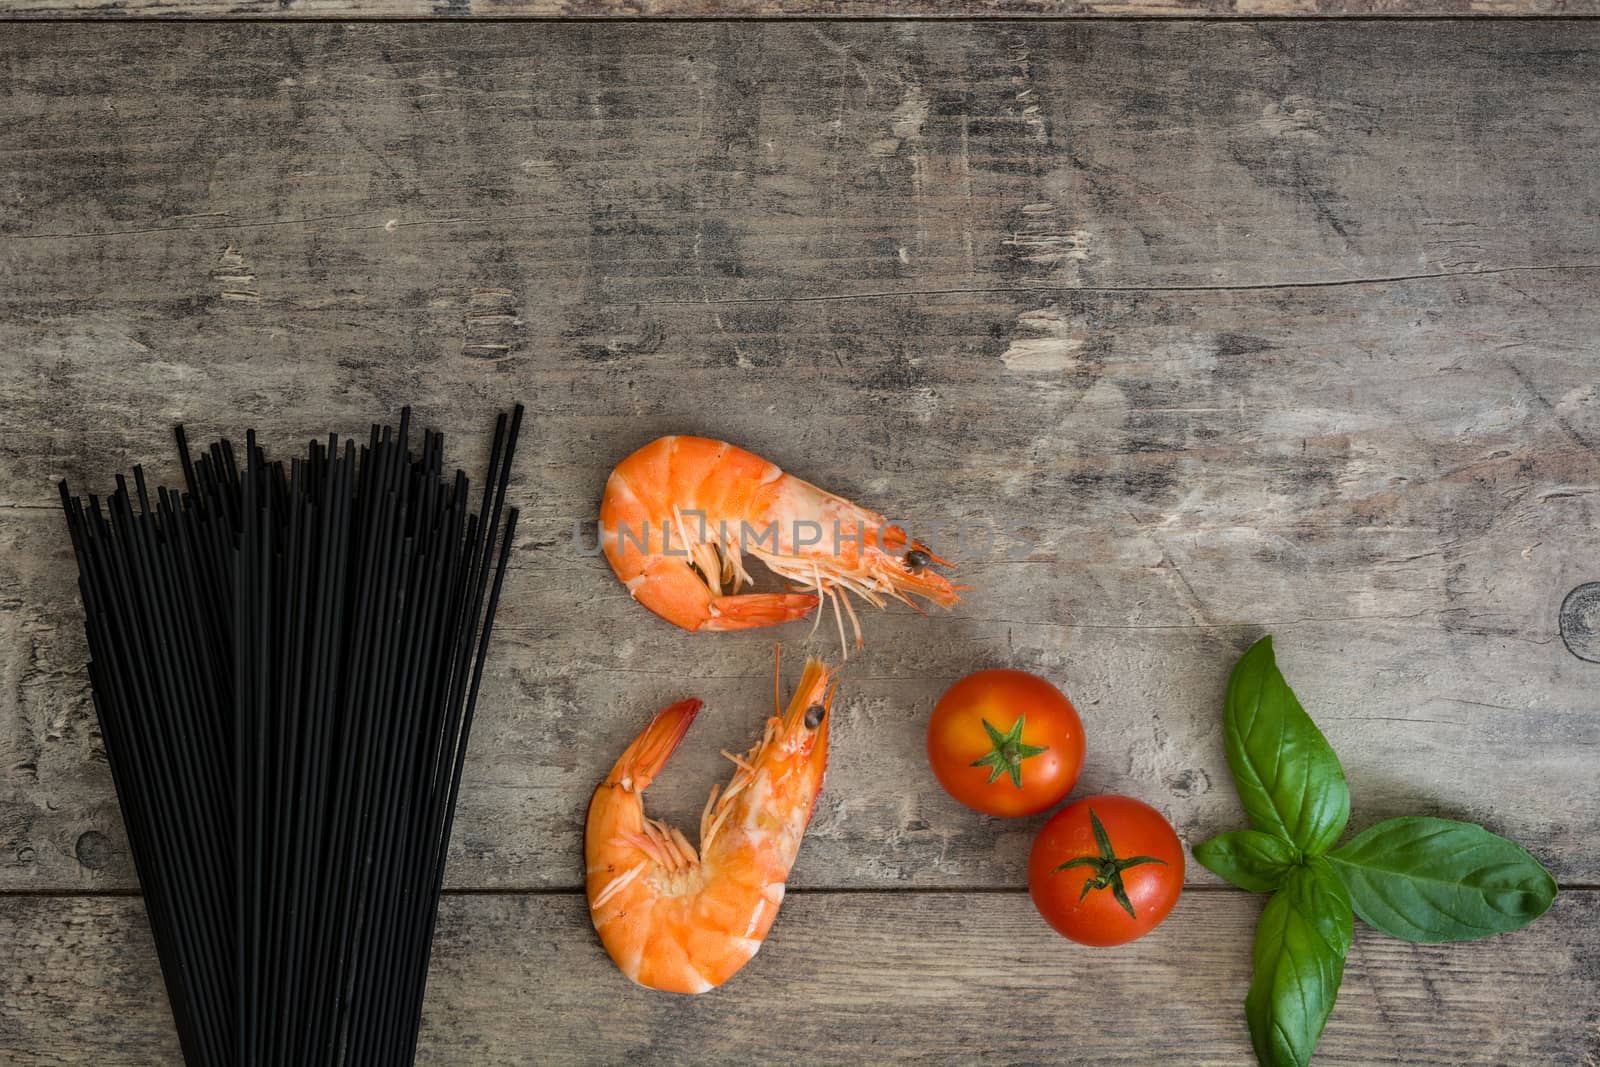 Raw black spaghetti with prawns, tomatoes and basil on wooden background by chandlervid85